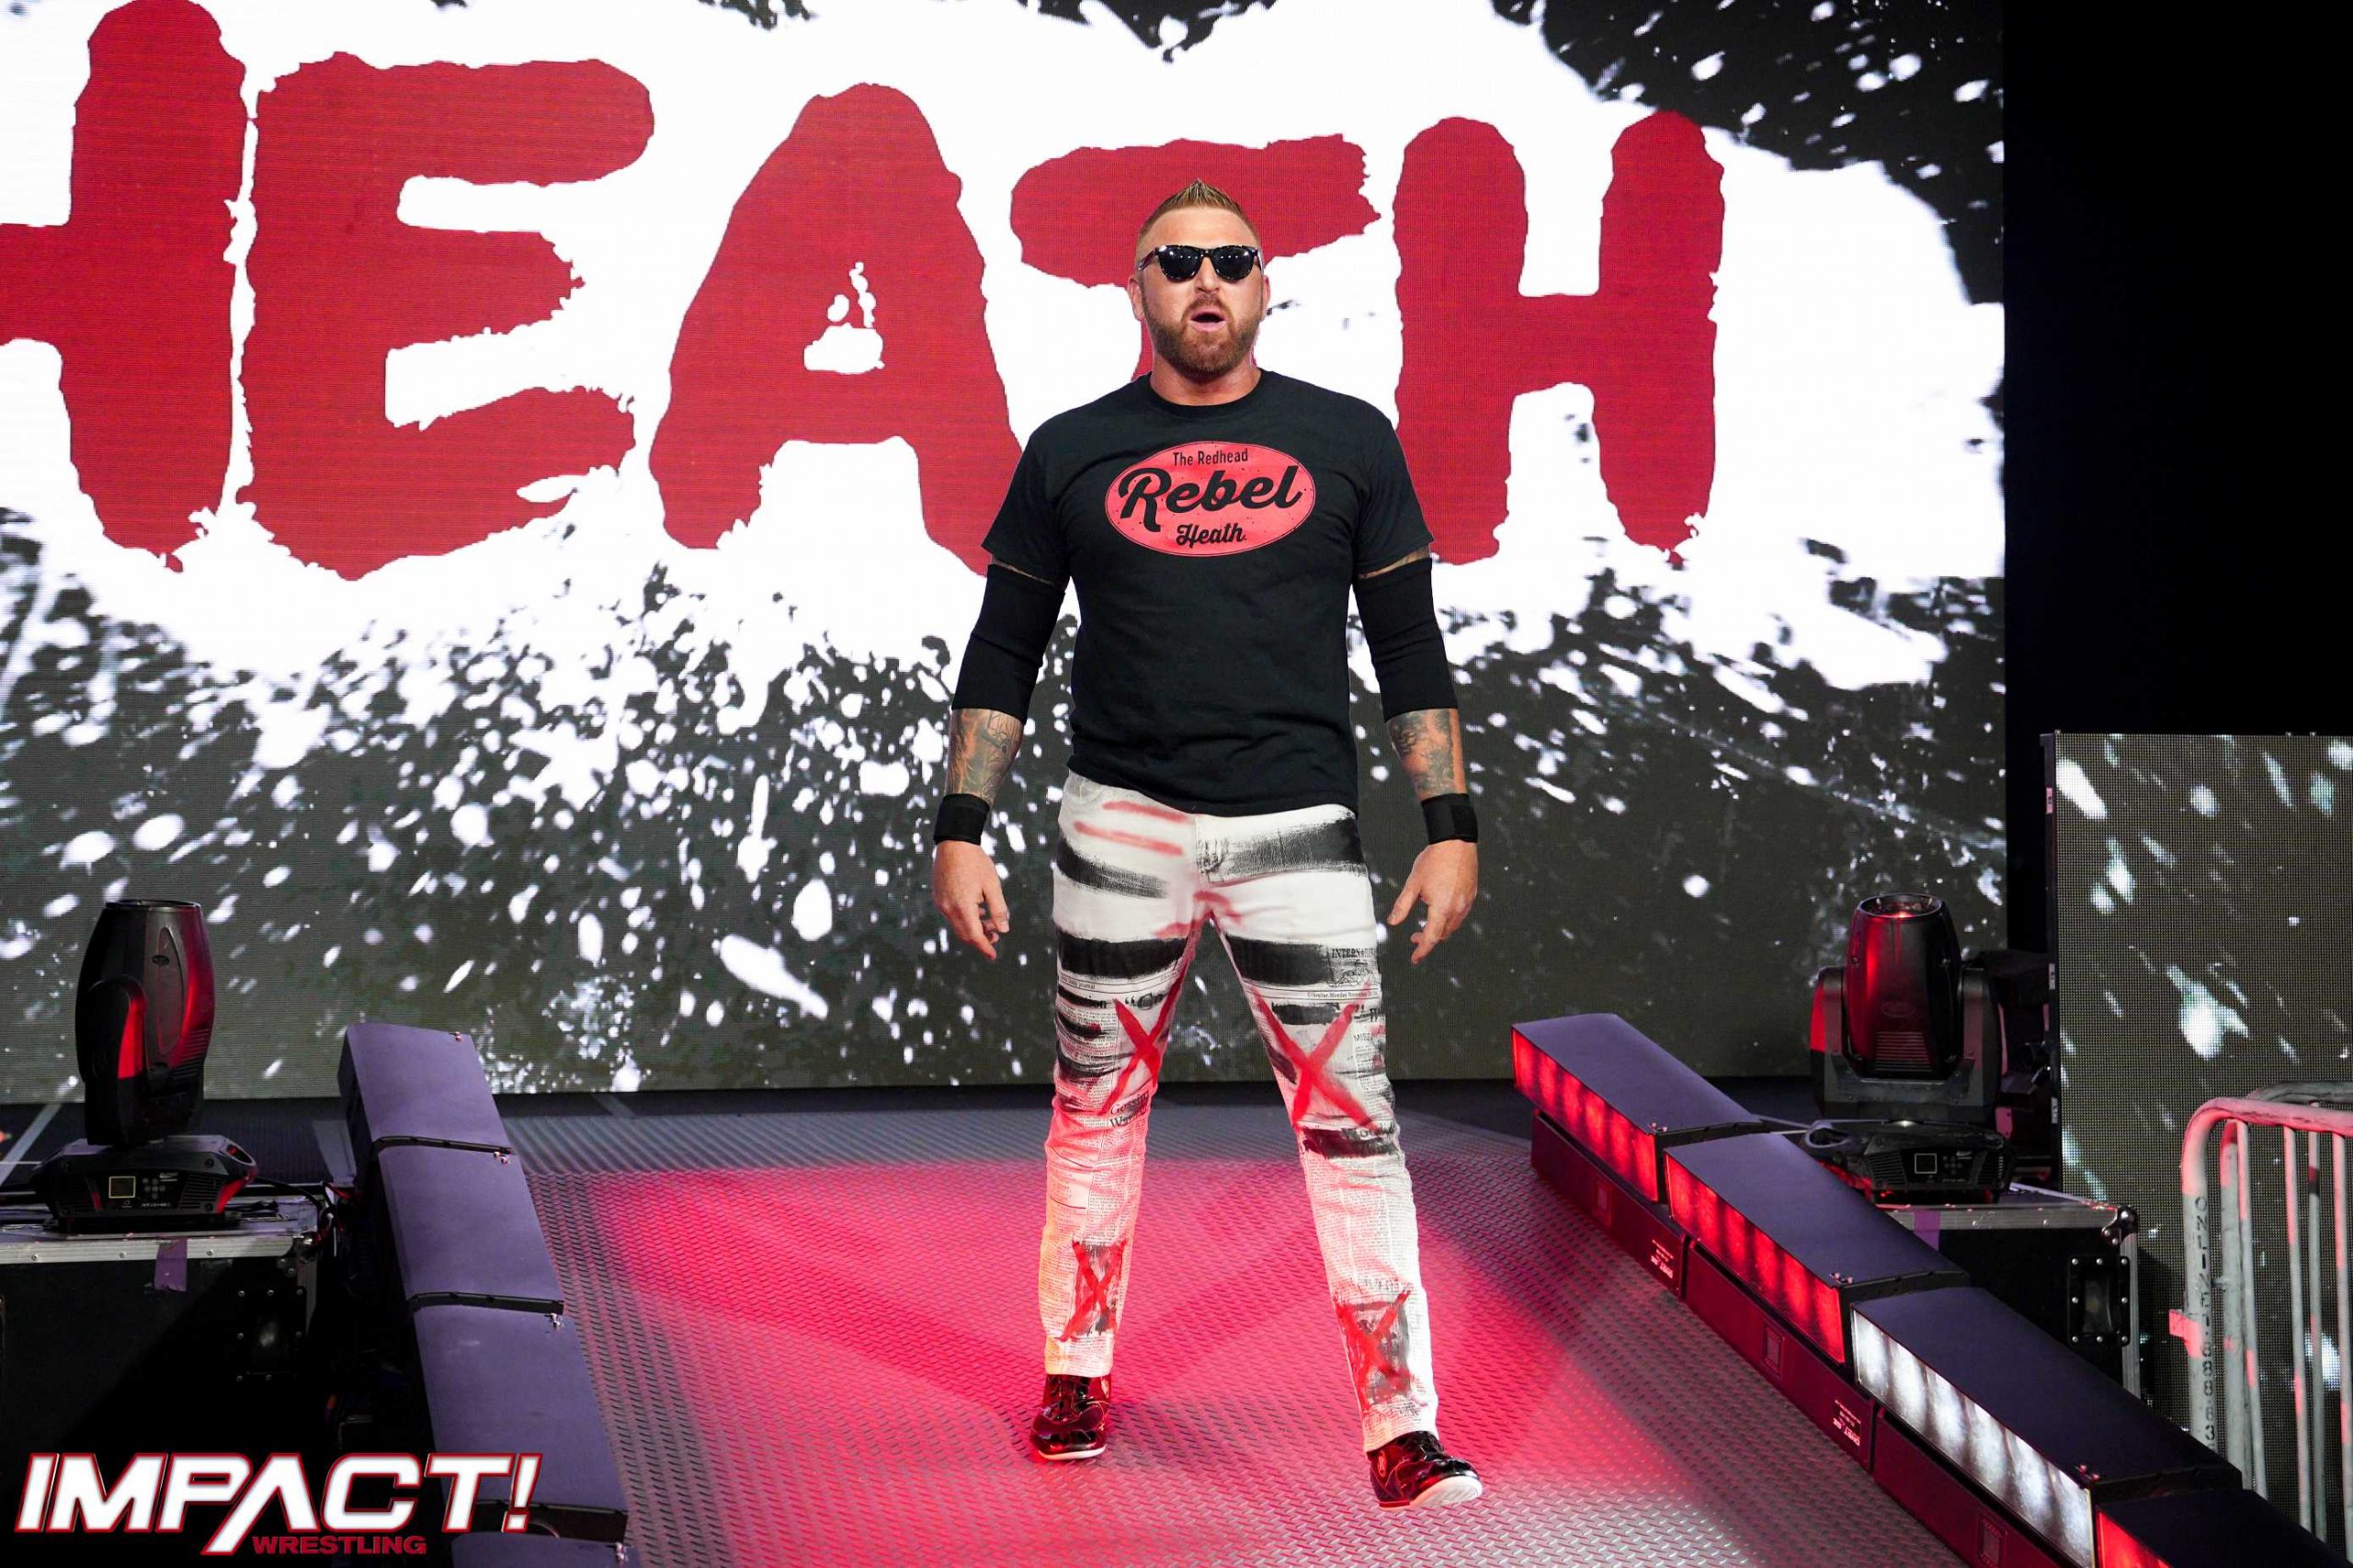 Heath reveals that he has one year left on his IMPACT Wrestling contract